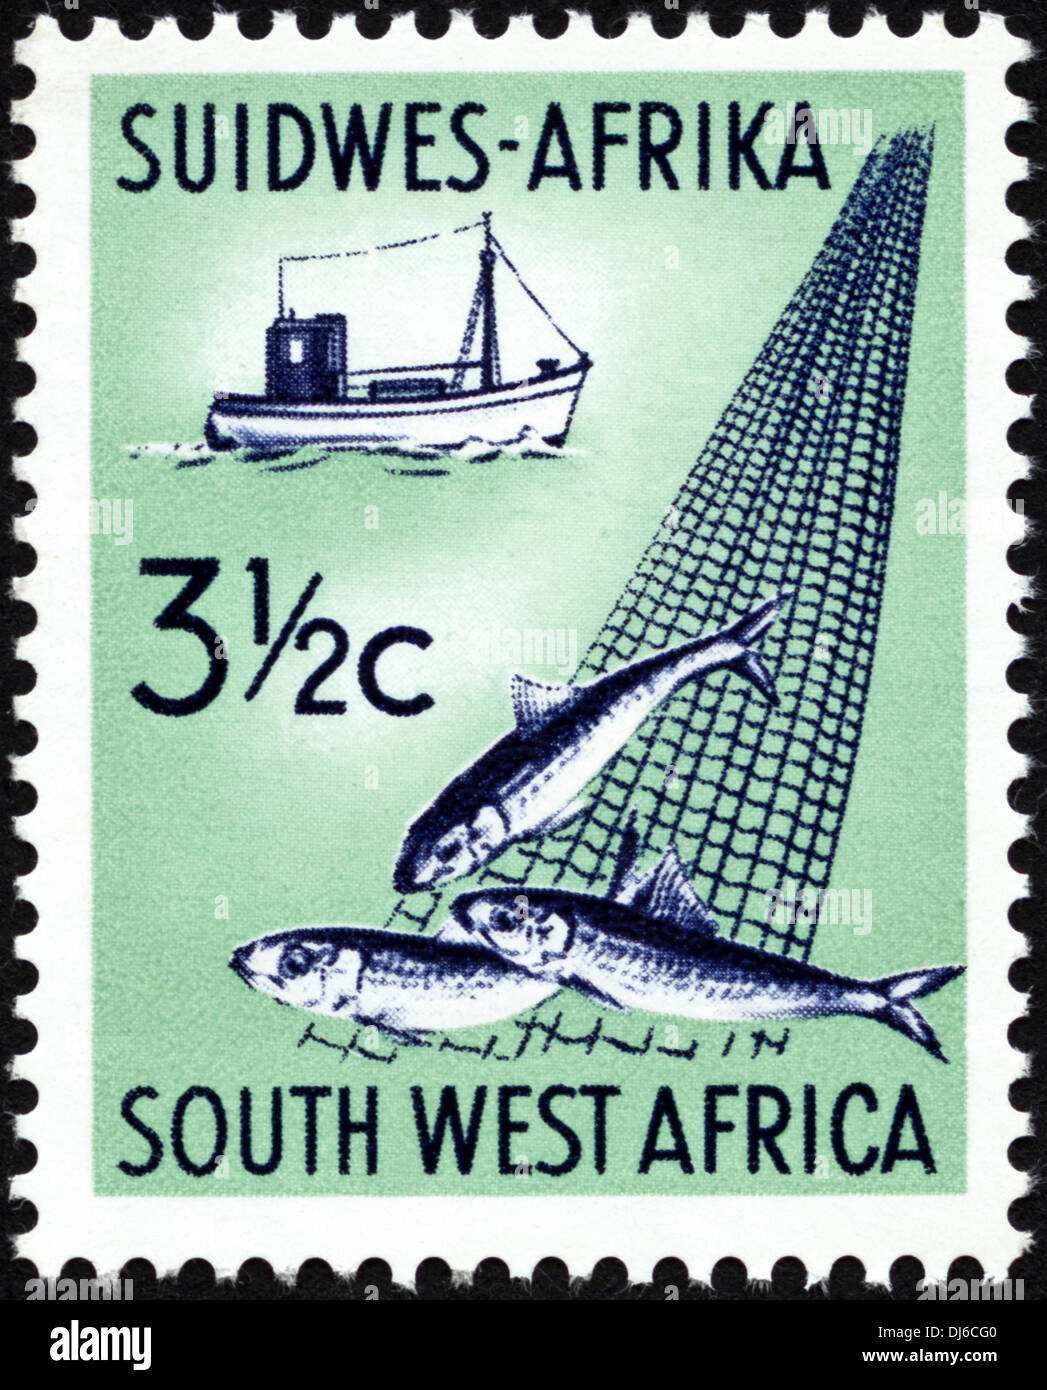 postage stamp South West Africa 3½c featuring fishing trawler dated 1961 Stock Photo